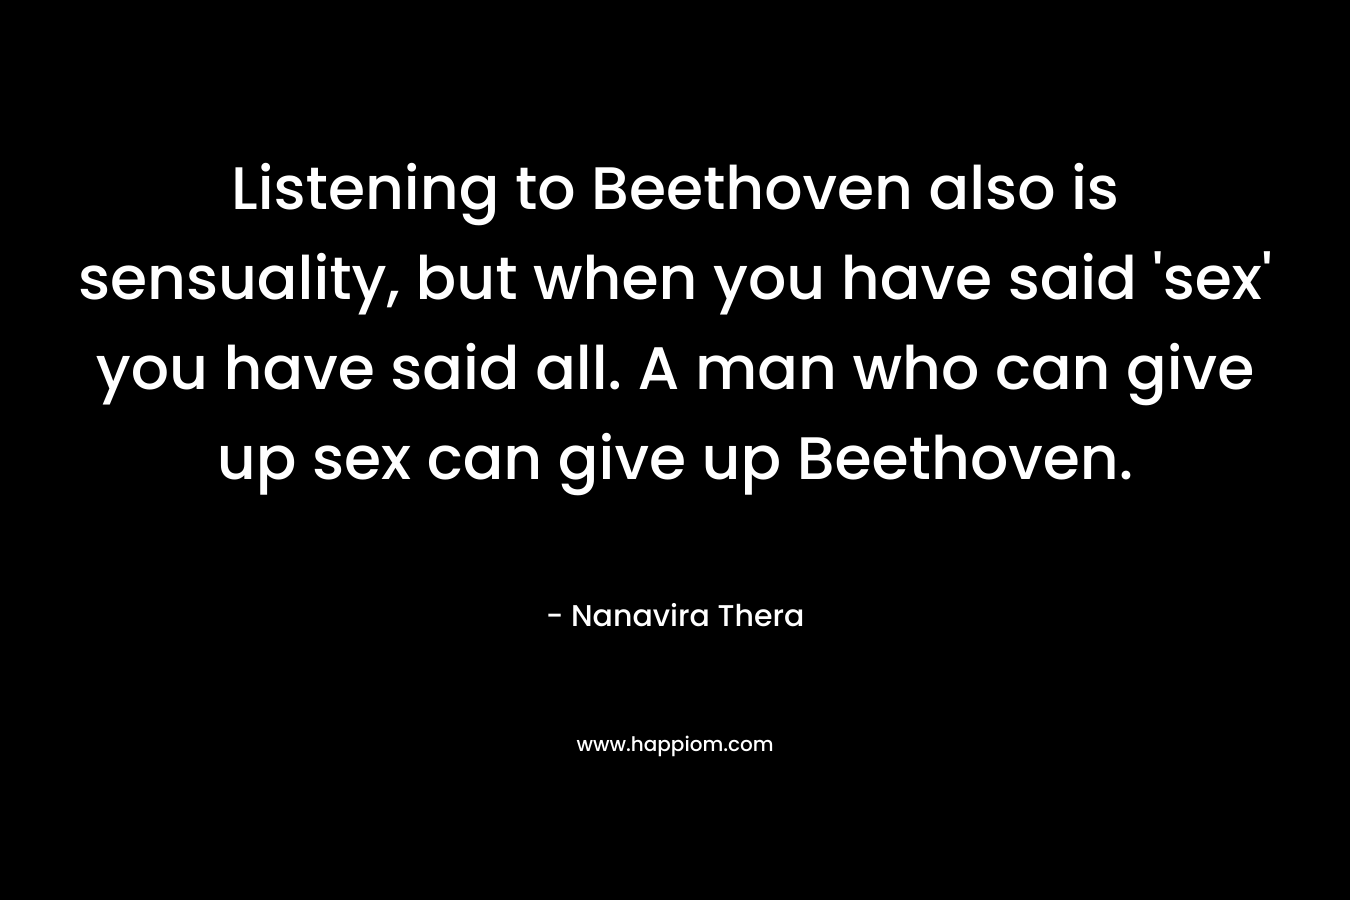 Listening to Beethoven also is sensuality, but when you have said 'sex' you have said all. A man who can give up sex can give up Beethoven.